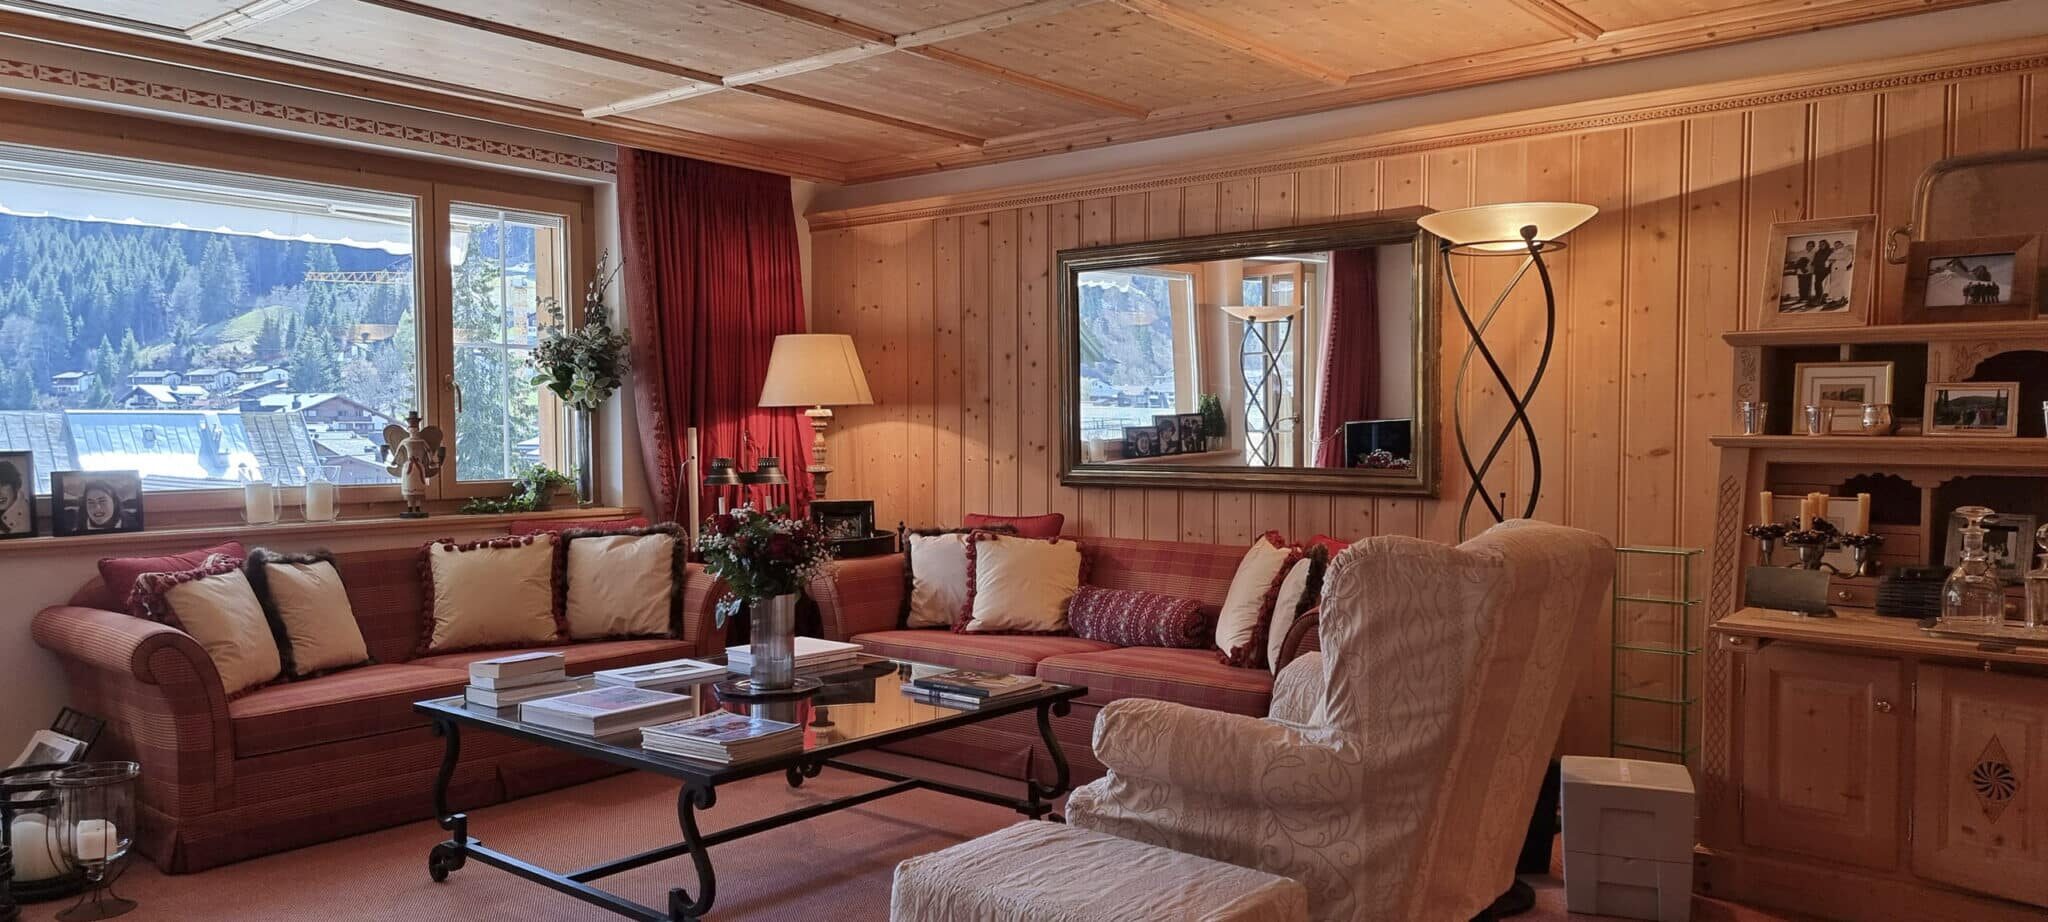 Ski property for sale in Klosters, Switzerland.